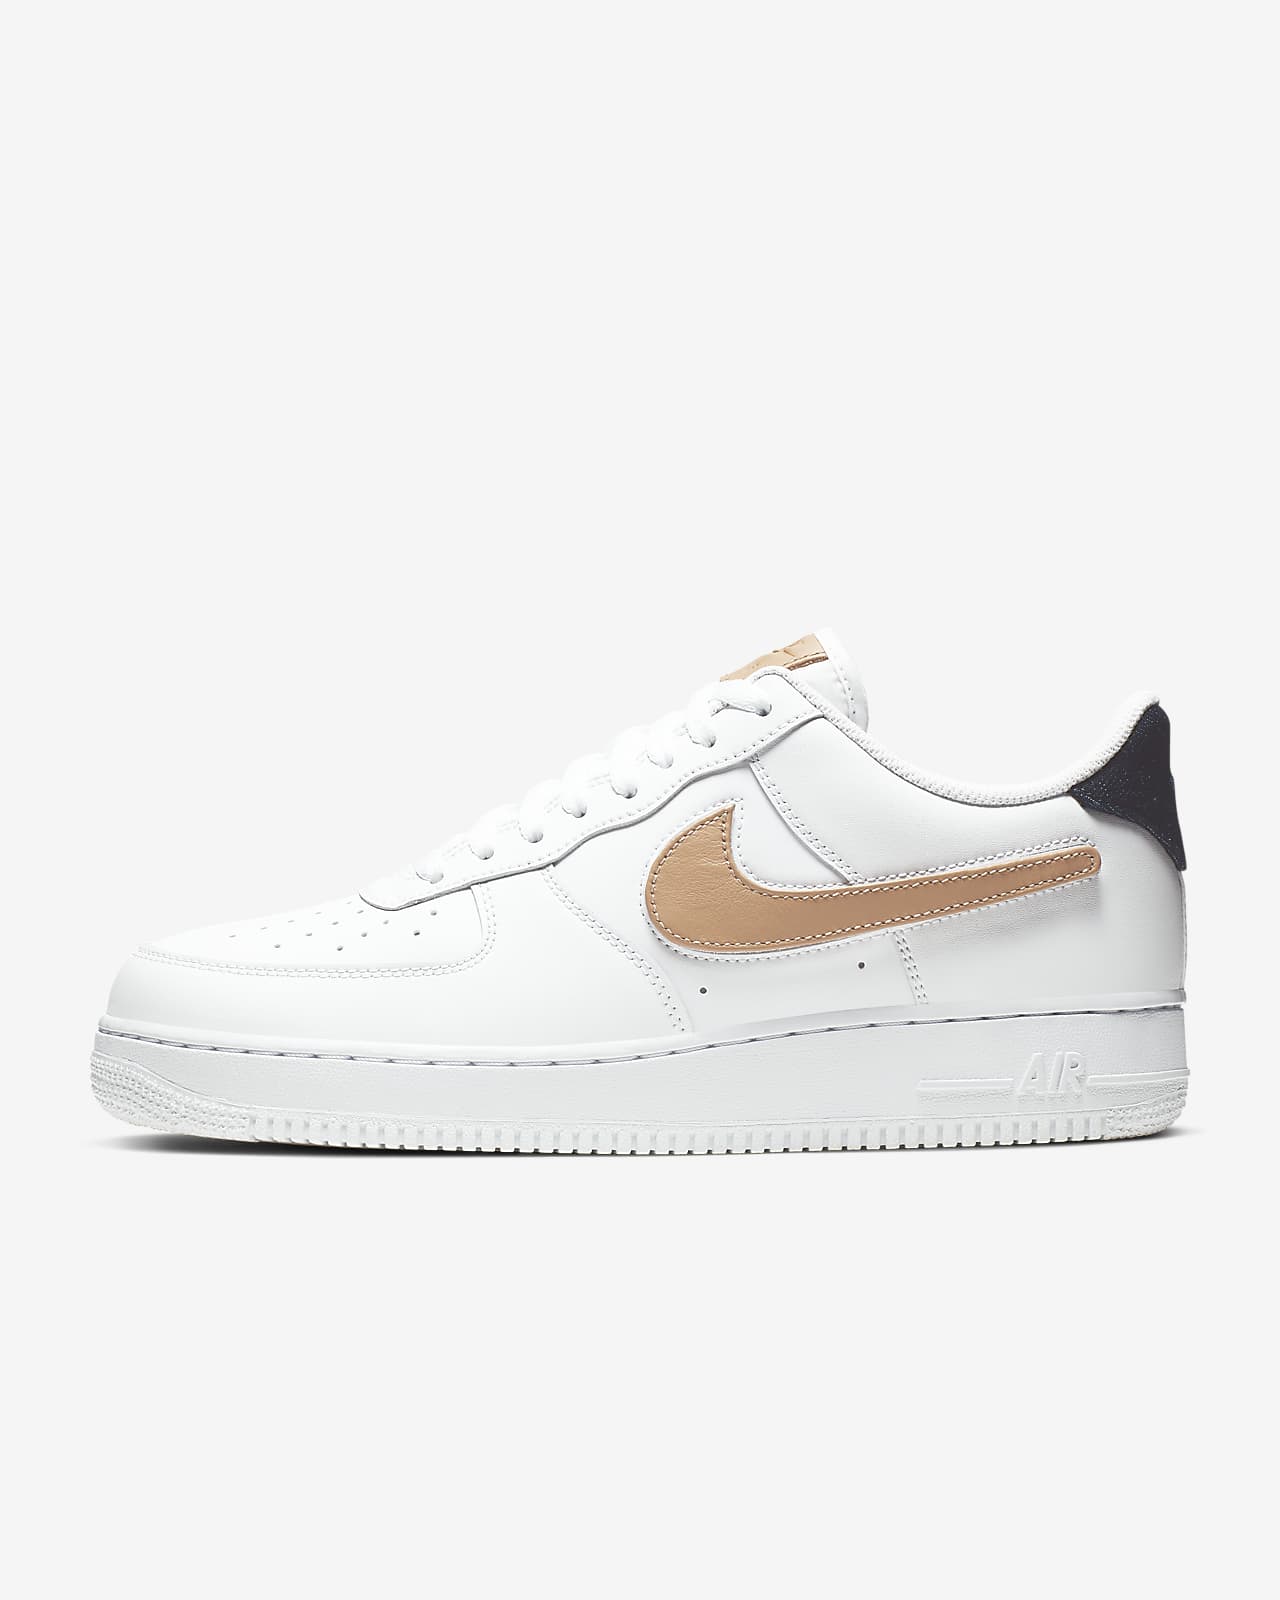 Scarpa Nike Air Force 1 '07 LV8 3 Removable Swoosh - Uomo خلاط دش مدفون